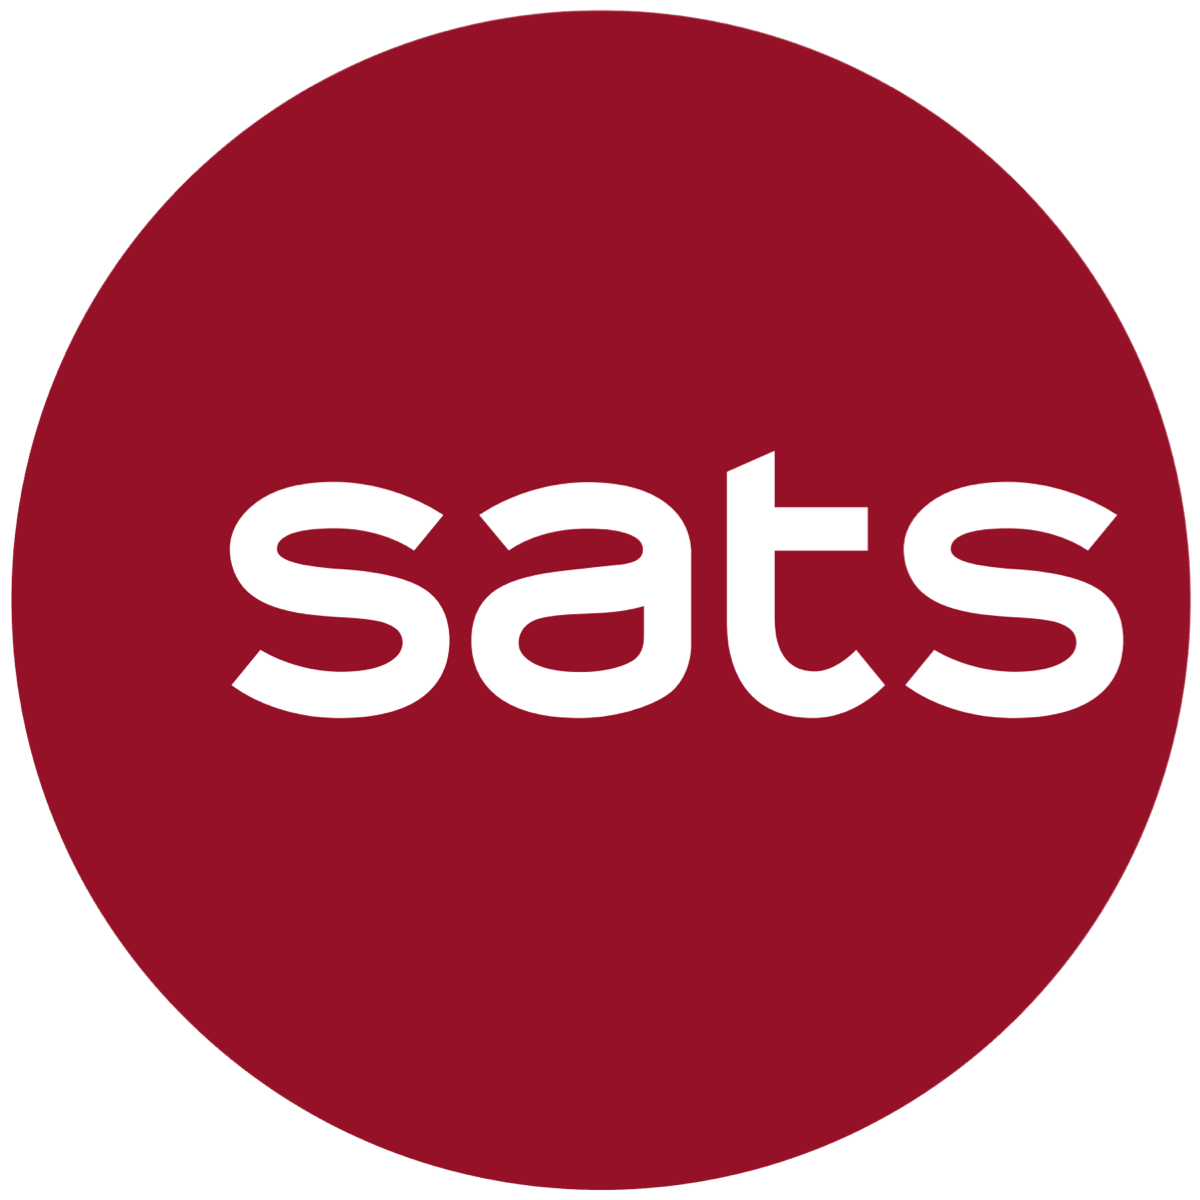 SATS Ltd - OCBC Investment 2018-06-14: Looking Attractive With A Long-term View